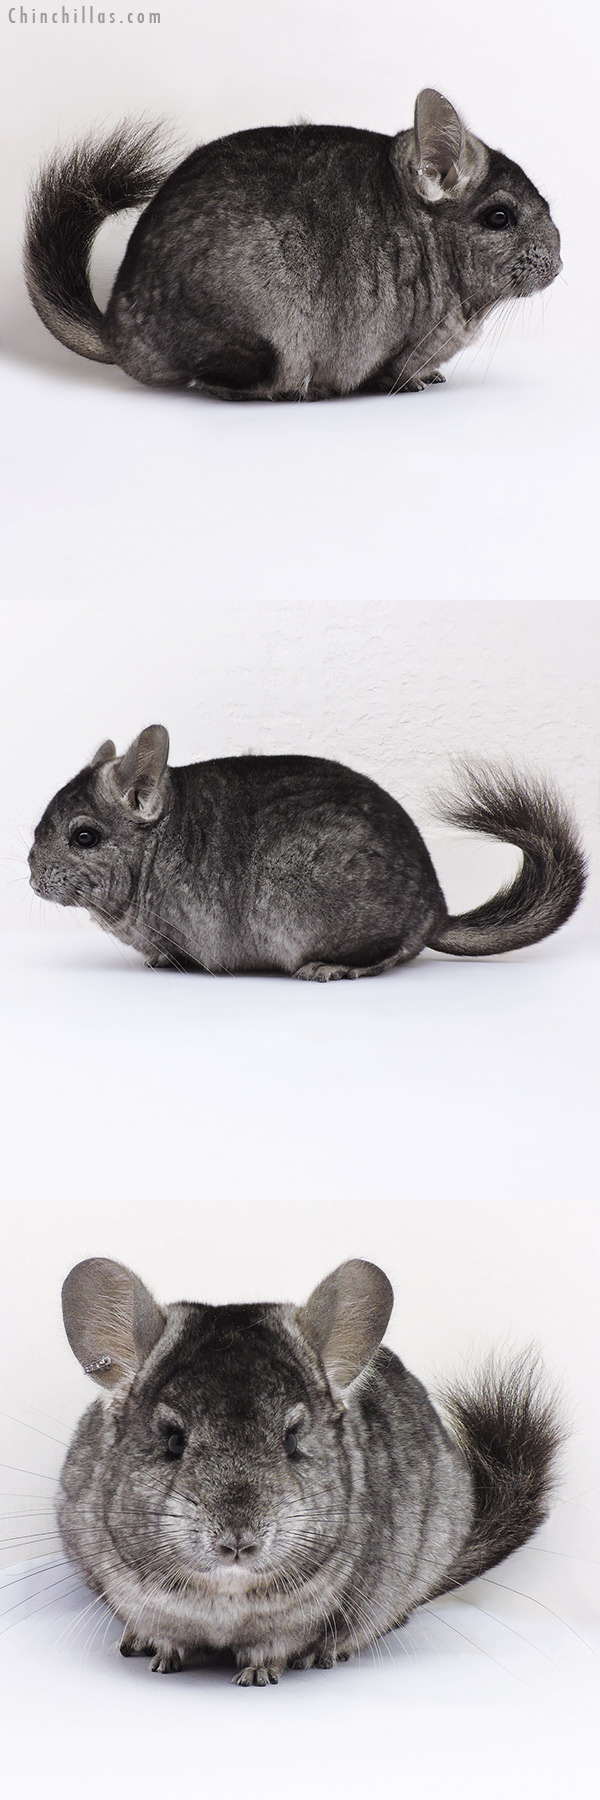 Chinchilla or related item offered for sale or export on Chinchillas.com - 16360 Hetero Ebony (  Royal Persian Angora Carrier ) Female Chinchilla